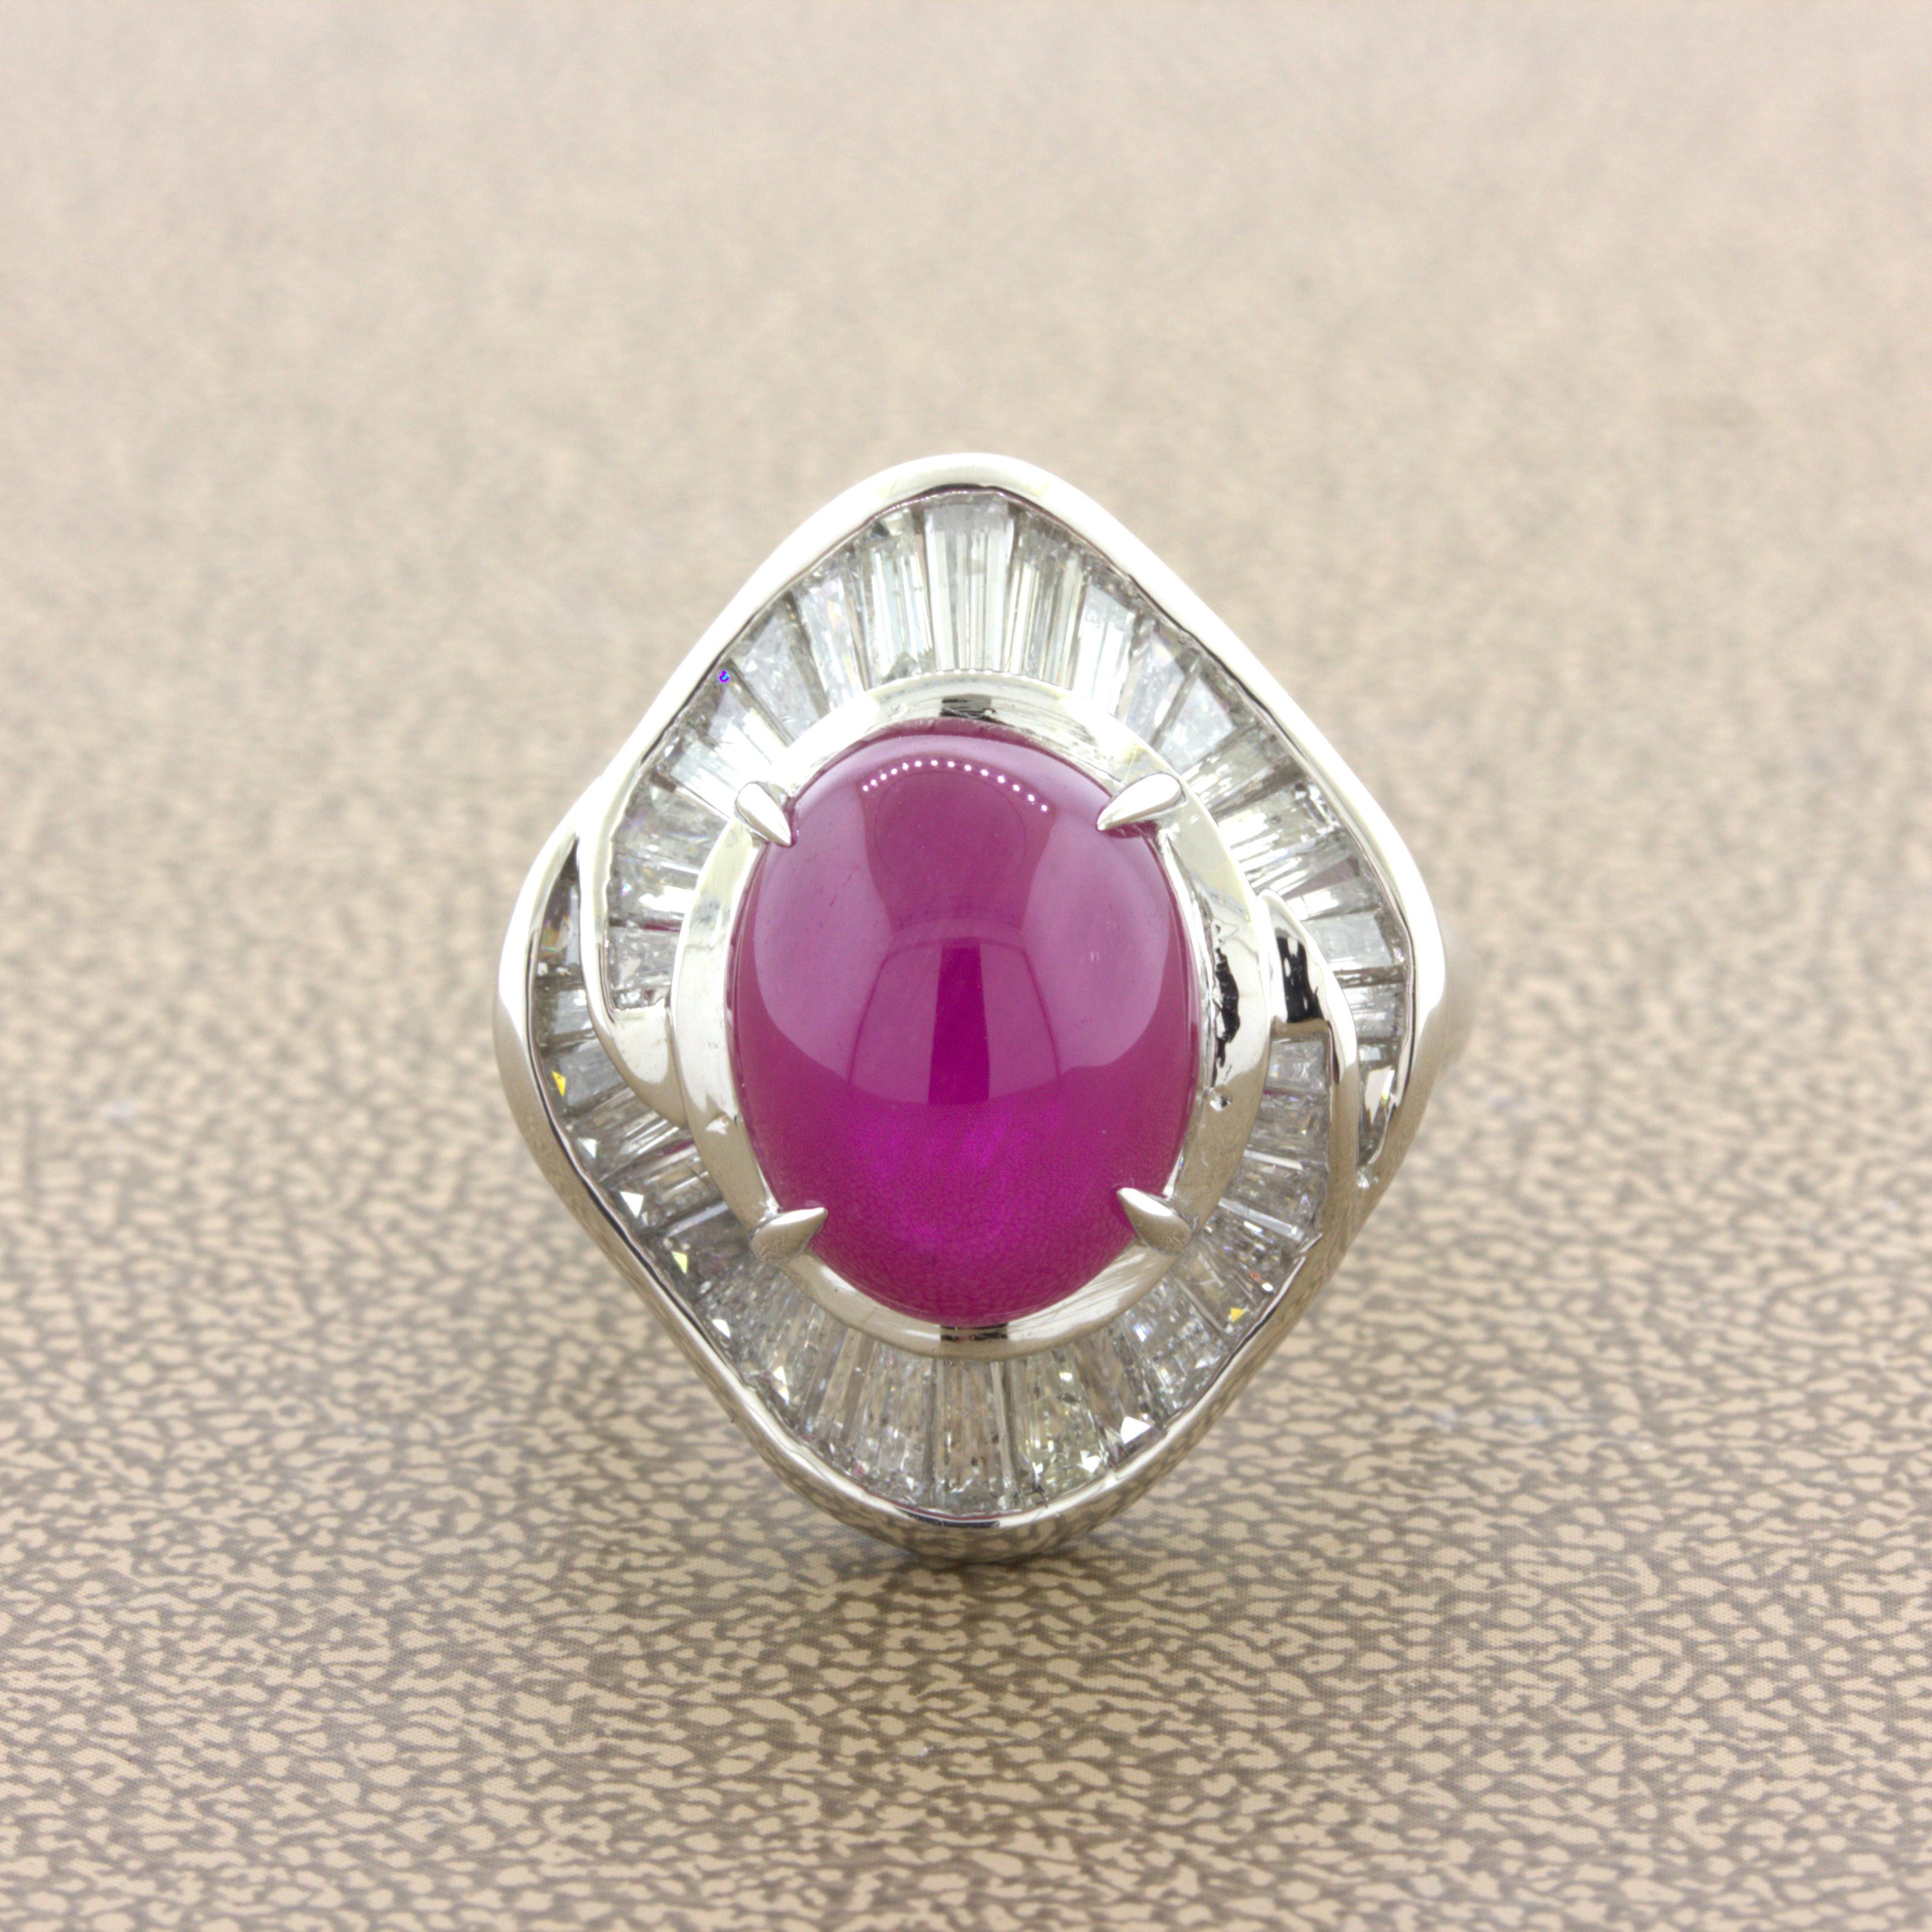 A significant and gorgeous platinum ring featuring a fine 9.34 carat natural ruby. It is cabochon-shaped with an even bright intense red color that glows in the light. It is complemented by 2.02 carats of baguette-cut diamonds set around the ruby in